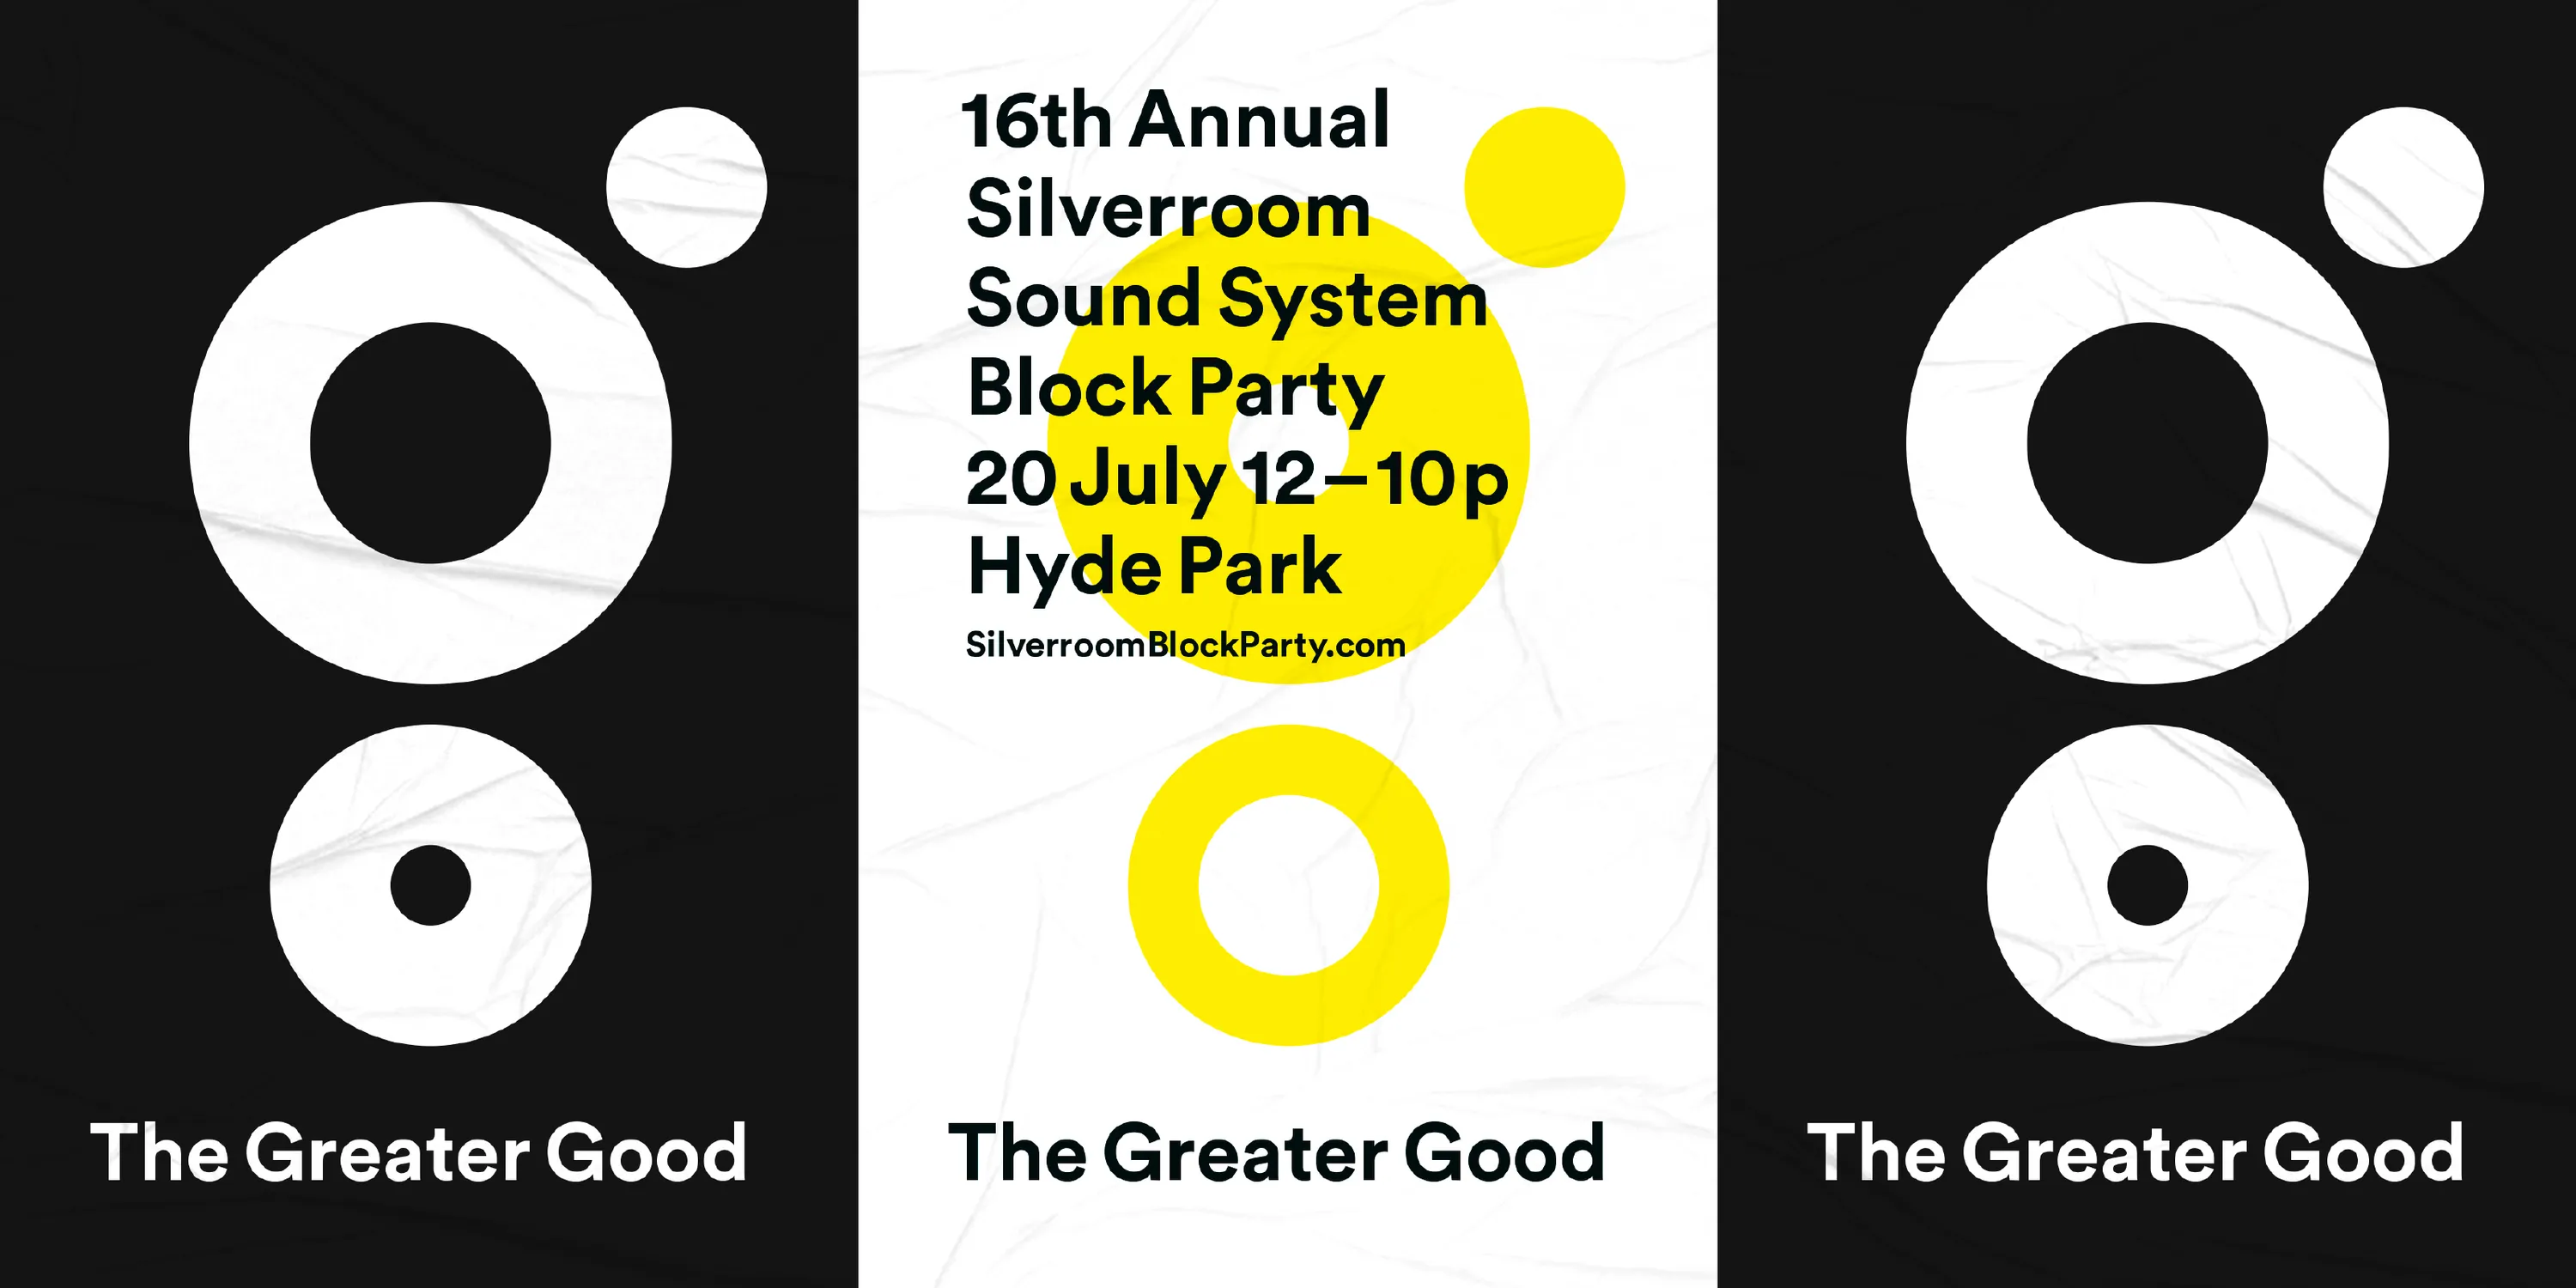 Thirst Design Silverroom Block Party Posters